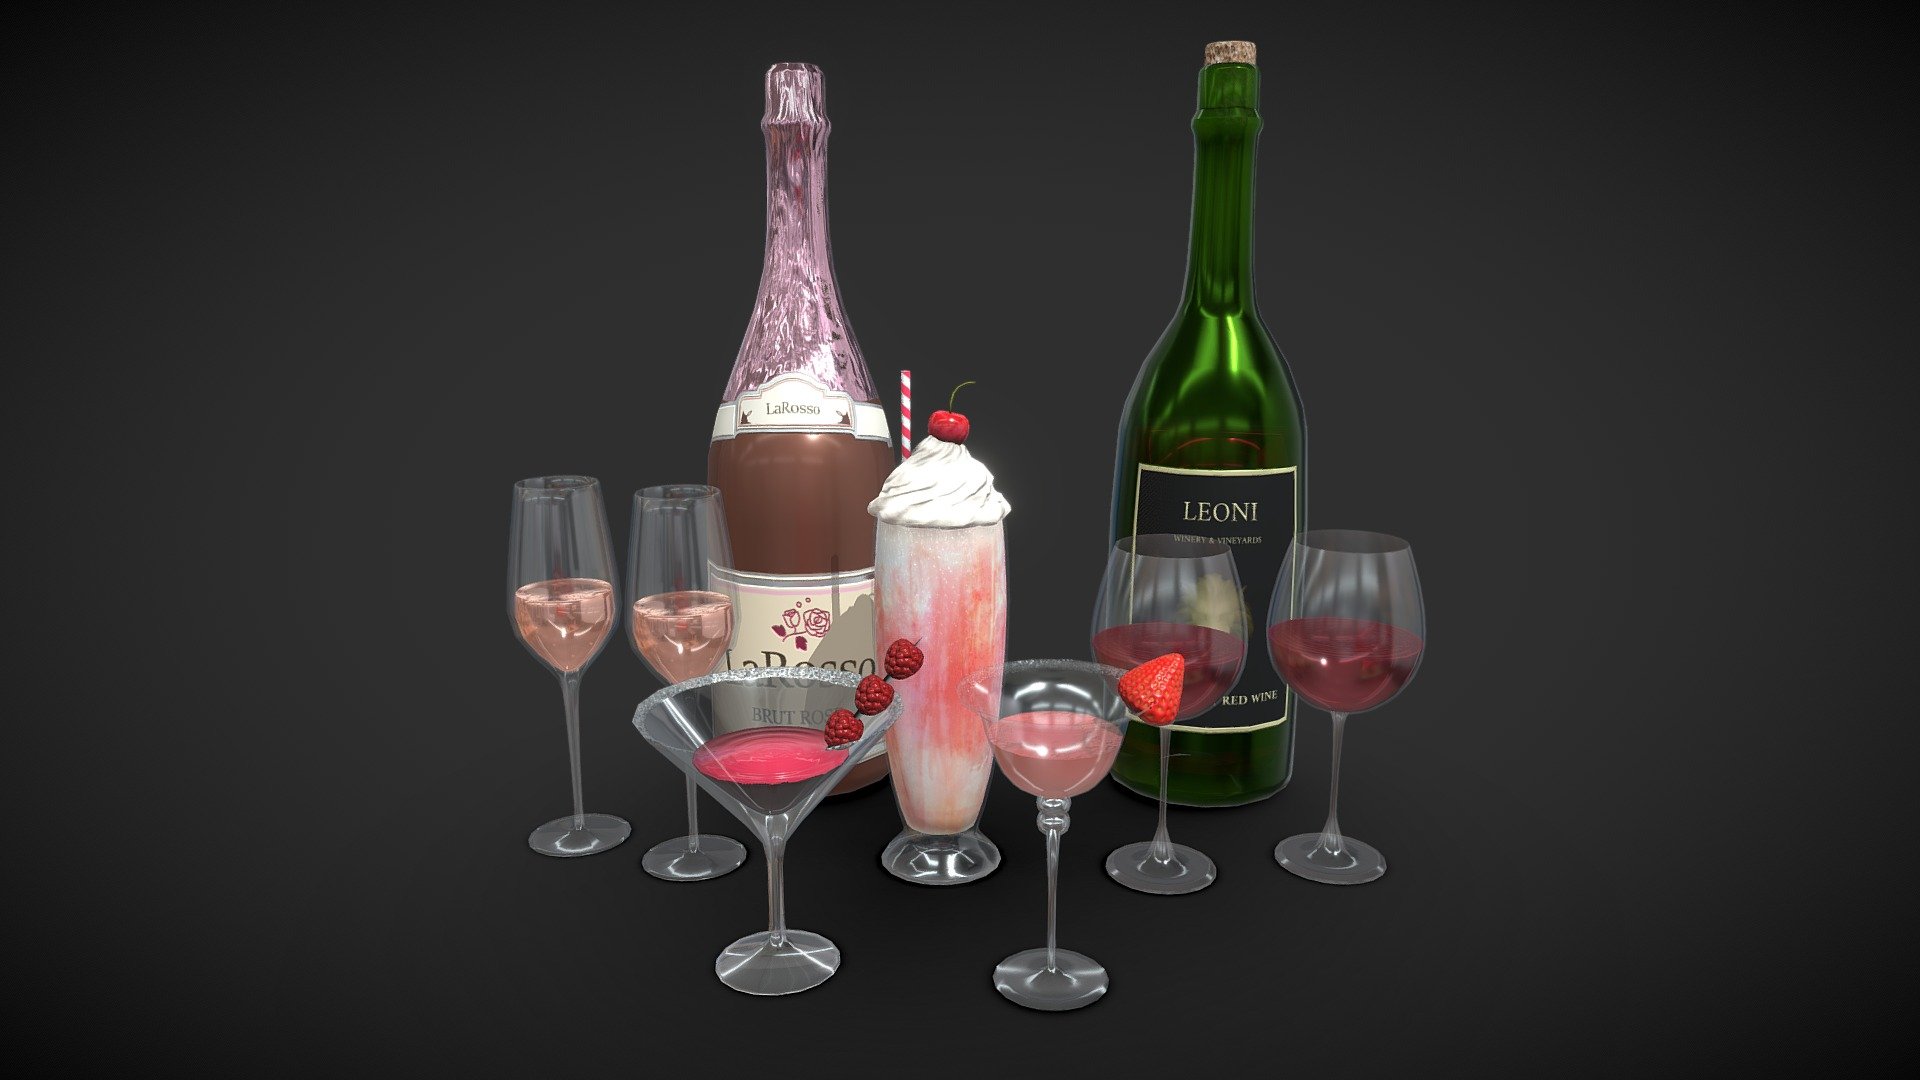 Alcoholic drinks pack

includes:




Drink in Martini Glass

Milkshake / cocktail 

Strawberry Alcoholic Drink

Wine Bottle and Glasses

Champagne with glasses

4096x4096 PNG texture

Triangles: 14.4k
Vertices: 7.4k




my food collection &lt;&lt;

my party / birthday collection &lt;&lt;
 - Alcoholic drinks pack - Buy Royalty Free 3D model by Karolina Renkiewicz (@KarolinaRenkiewicz) 3d model